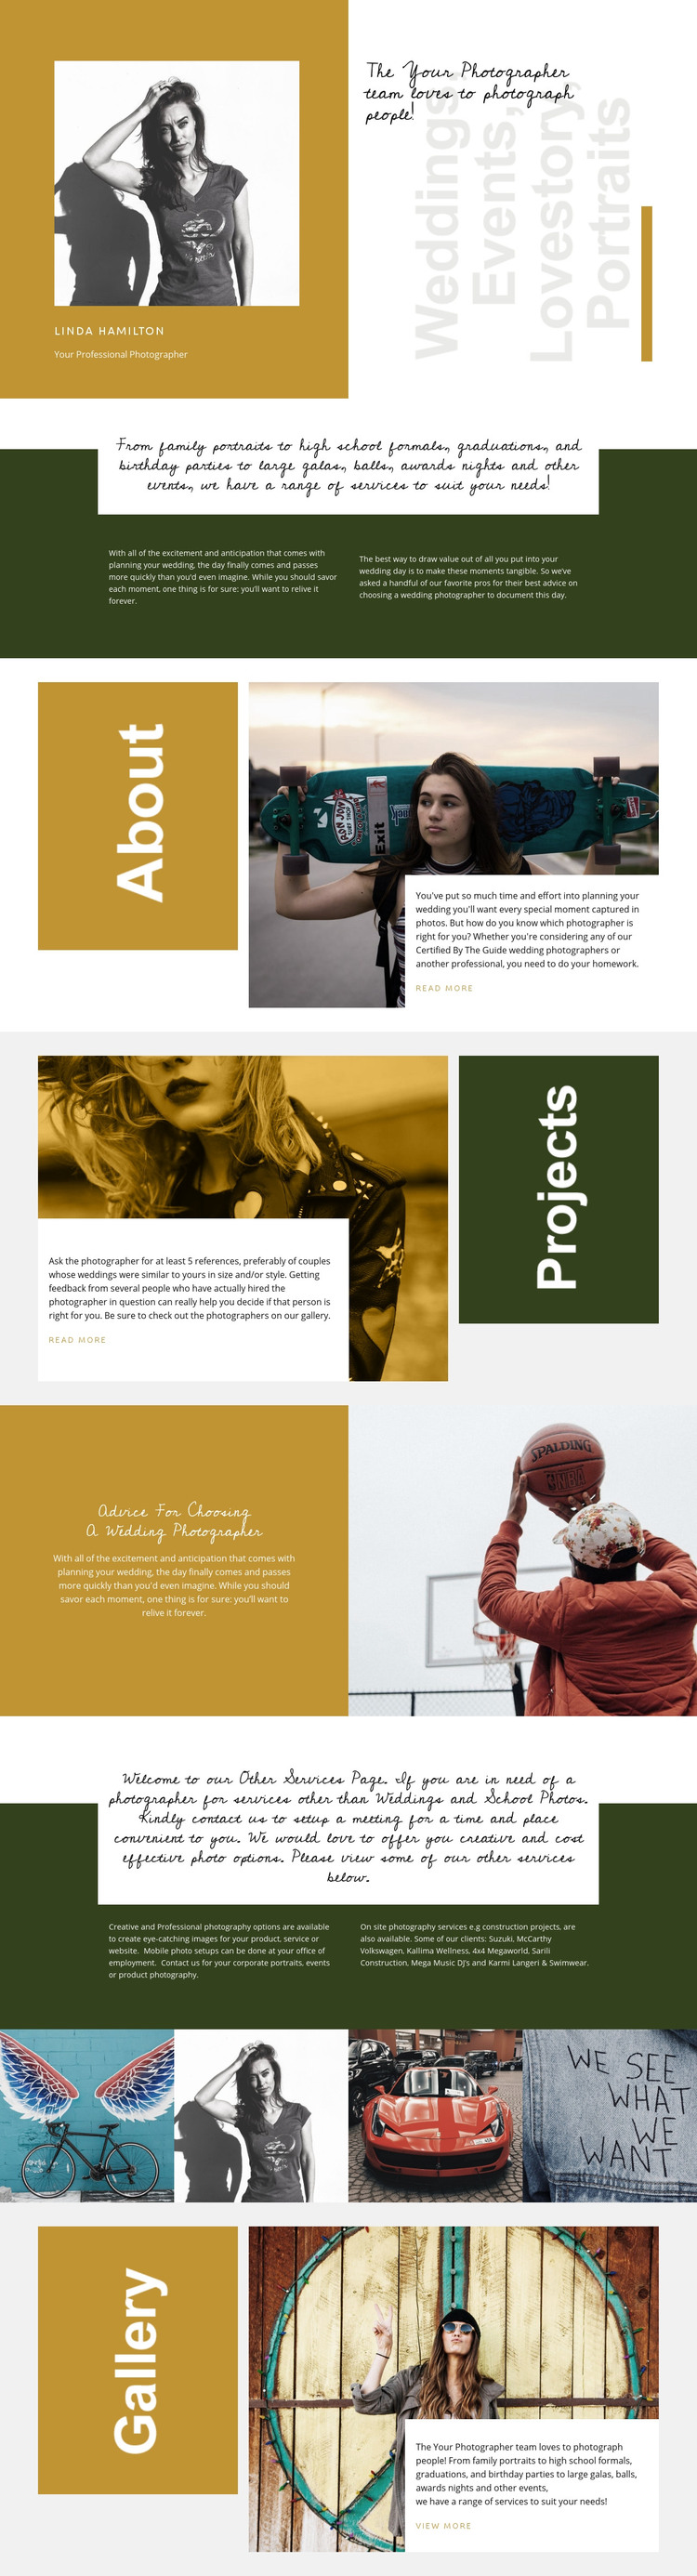 Fashion photography courses Homepage Design